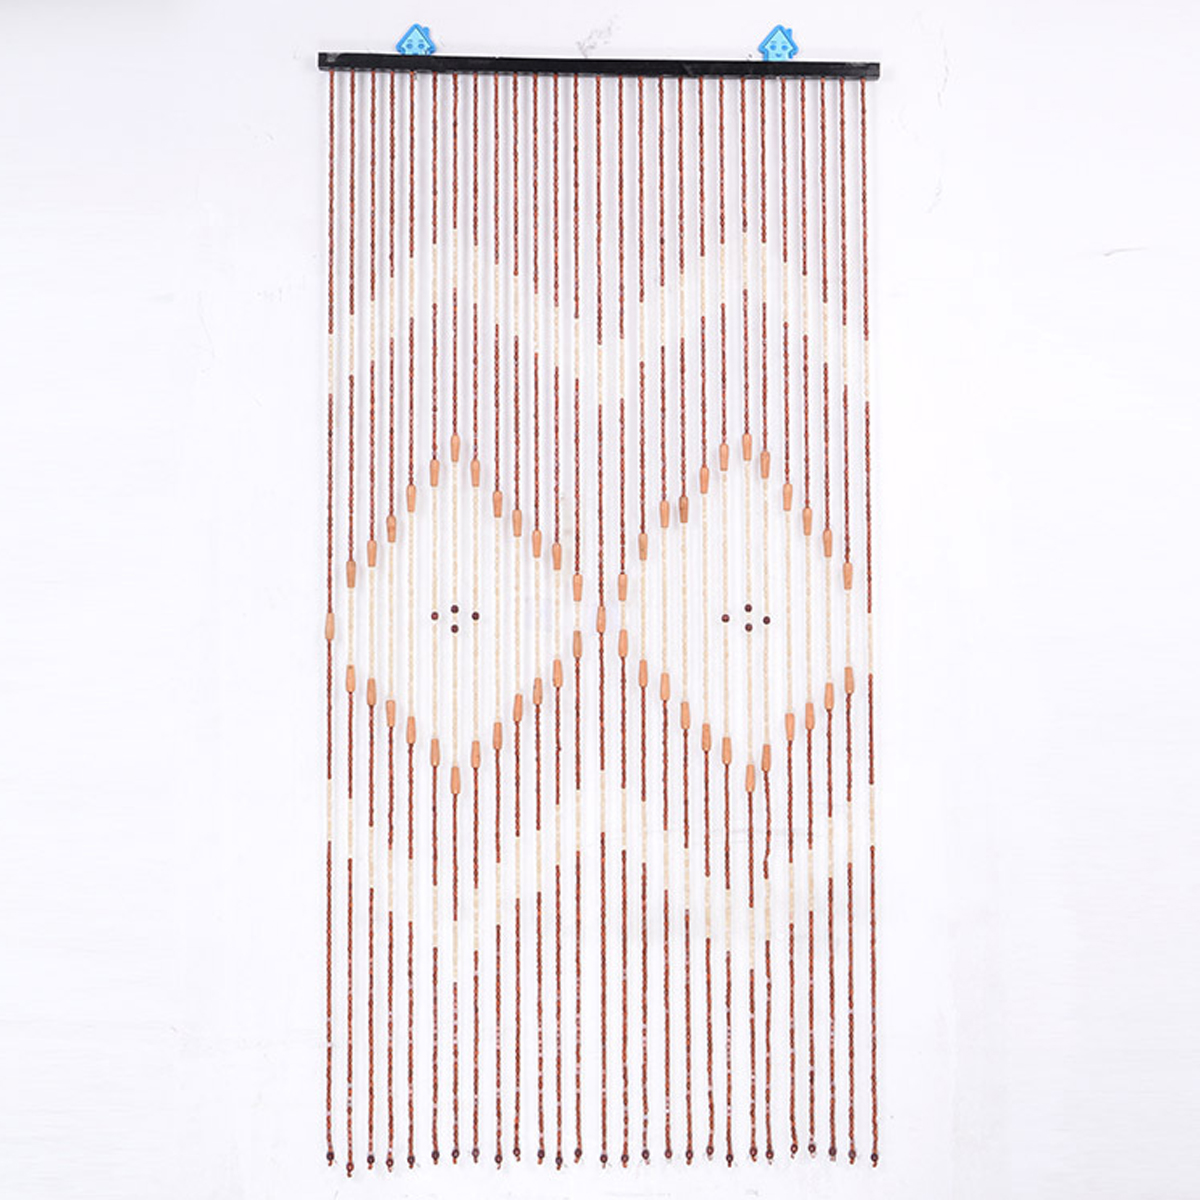 90x175cm-27Line-Wooden-Bead-Curtains-Fly-Screen-Porch-Bedroom-Living-Room-Divider-1599032-2